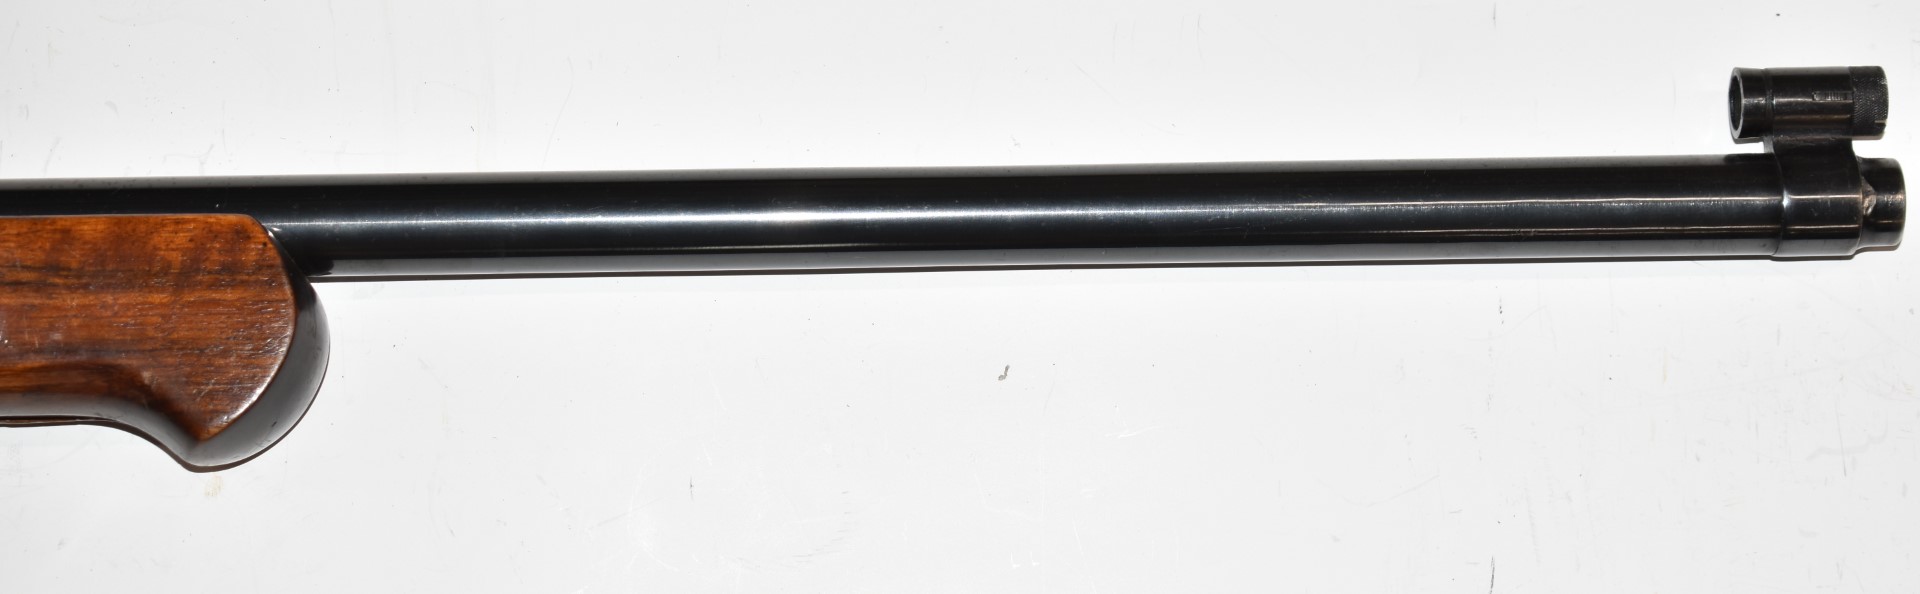 Vostok MU-12 .22 bolt-action target rifle with thumb hole grip, chequered forend, raised cheek - Image 5 of 15